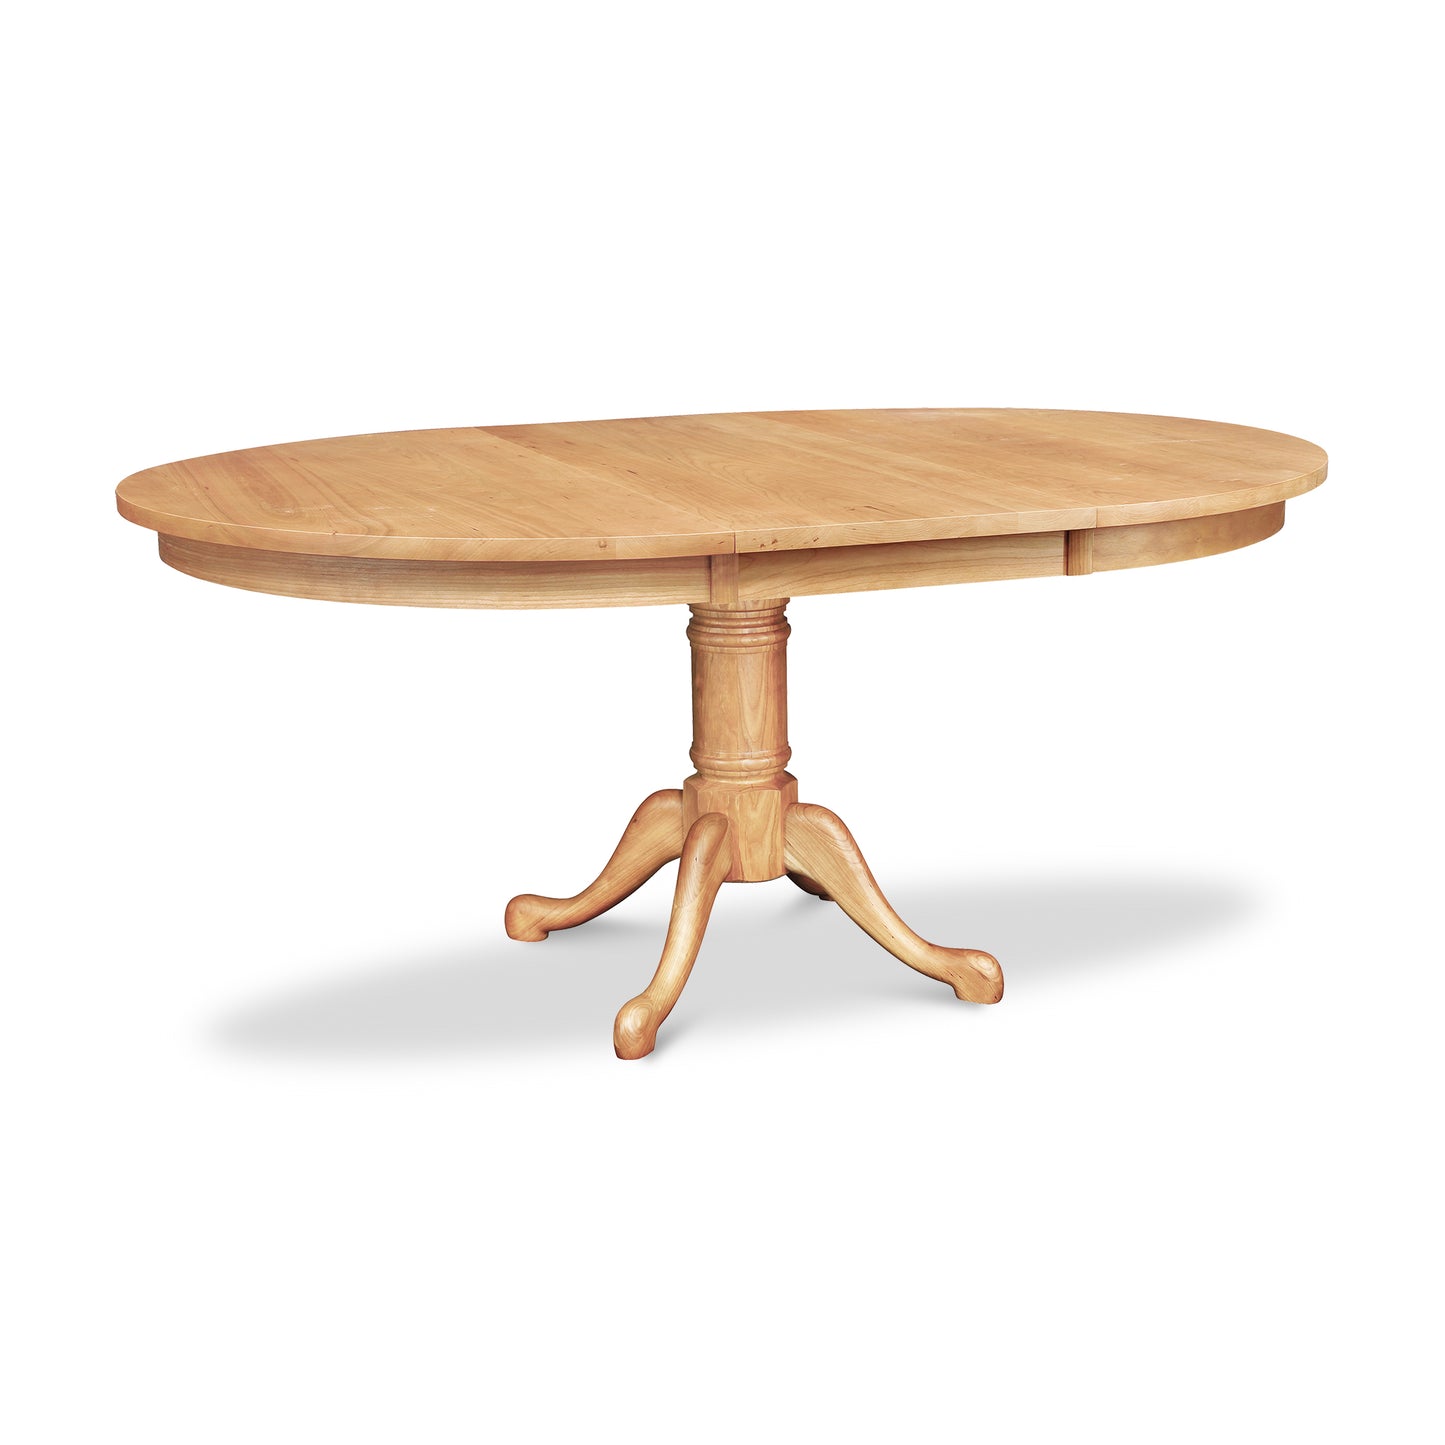 A traditional claw foot Lyndon Furniture Cabriole Single Pedestal Round Extension Table with a pedestal base.